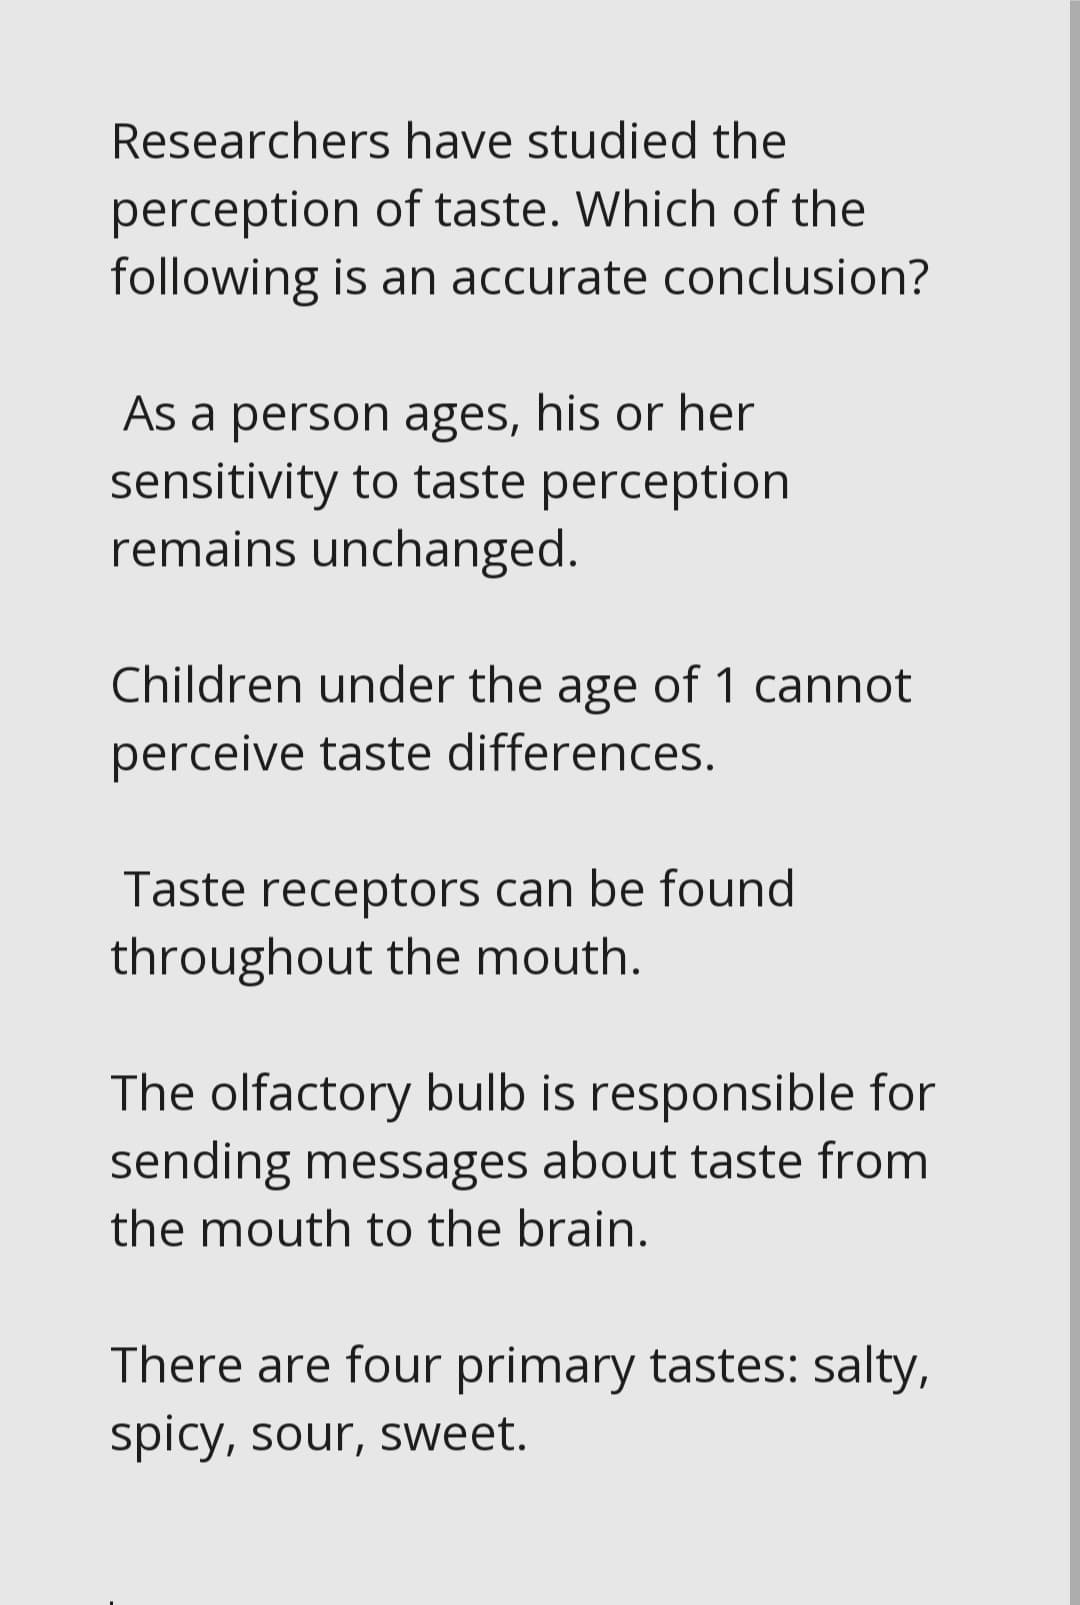 Researchers have studied the
perception of taste. Which of the
following is an accurate conclusion?
As a person ages, his or her
sensitivity to taste perception
remains unchanged.
Children under the age of 1 cannot
perceive taste differences.
Taste receptors can be found
throughout the mouth.
The olfactory bulb is responsible for
sending messages about taste from
the mouth to the brain.
There are four primary tastes: salty,
spicy, sour, sweet.